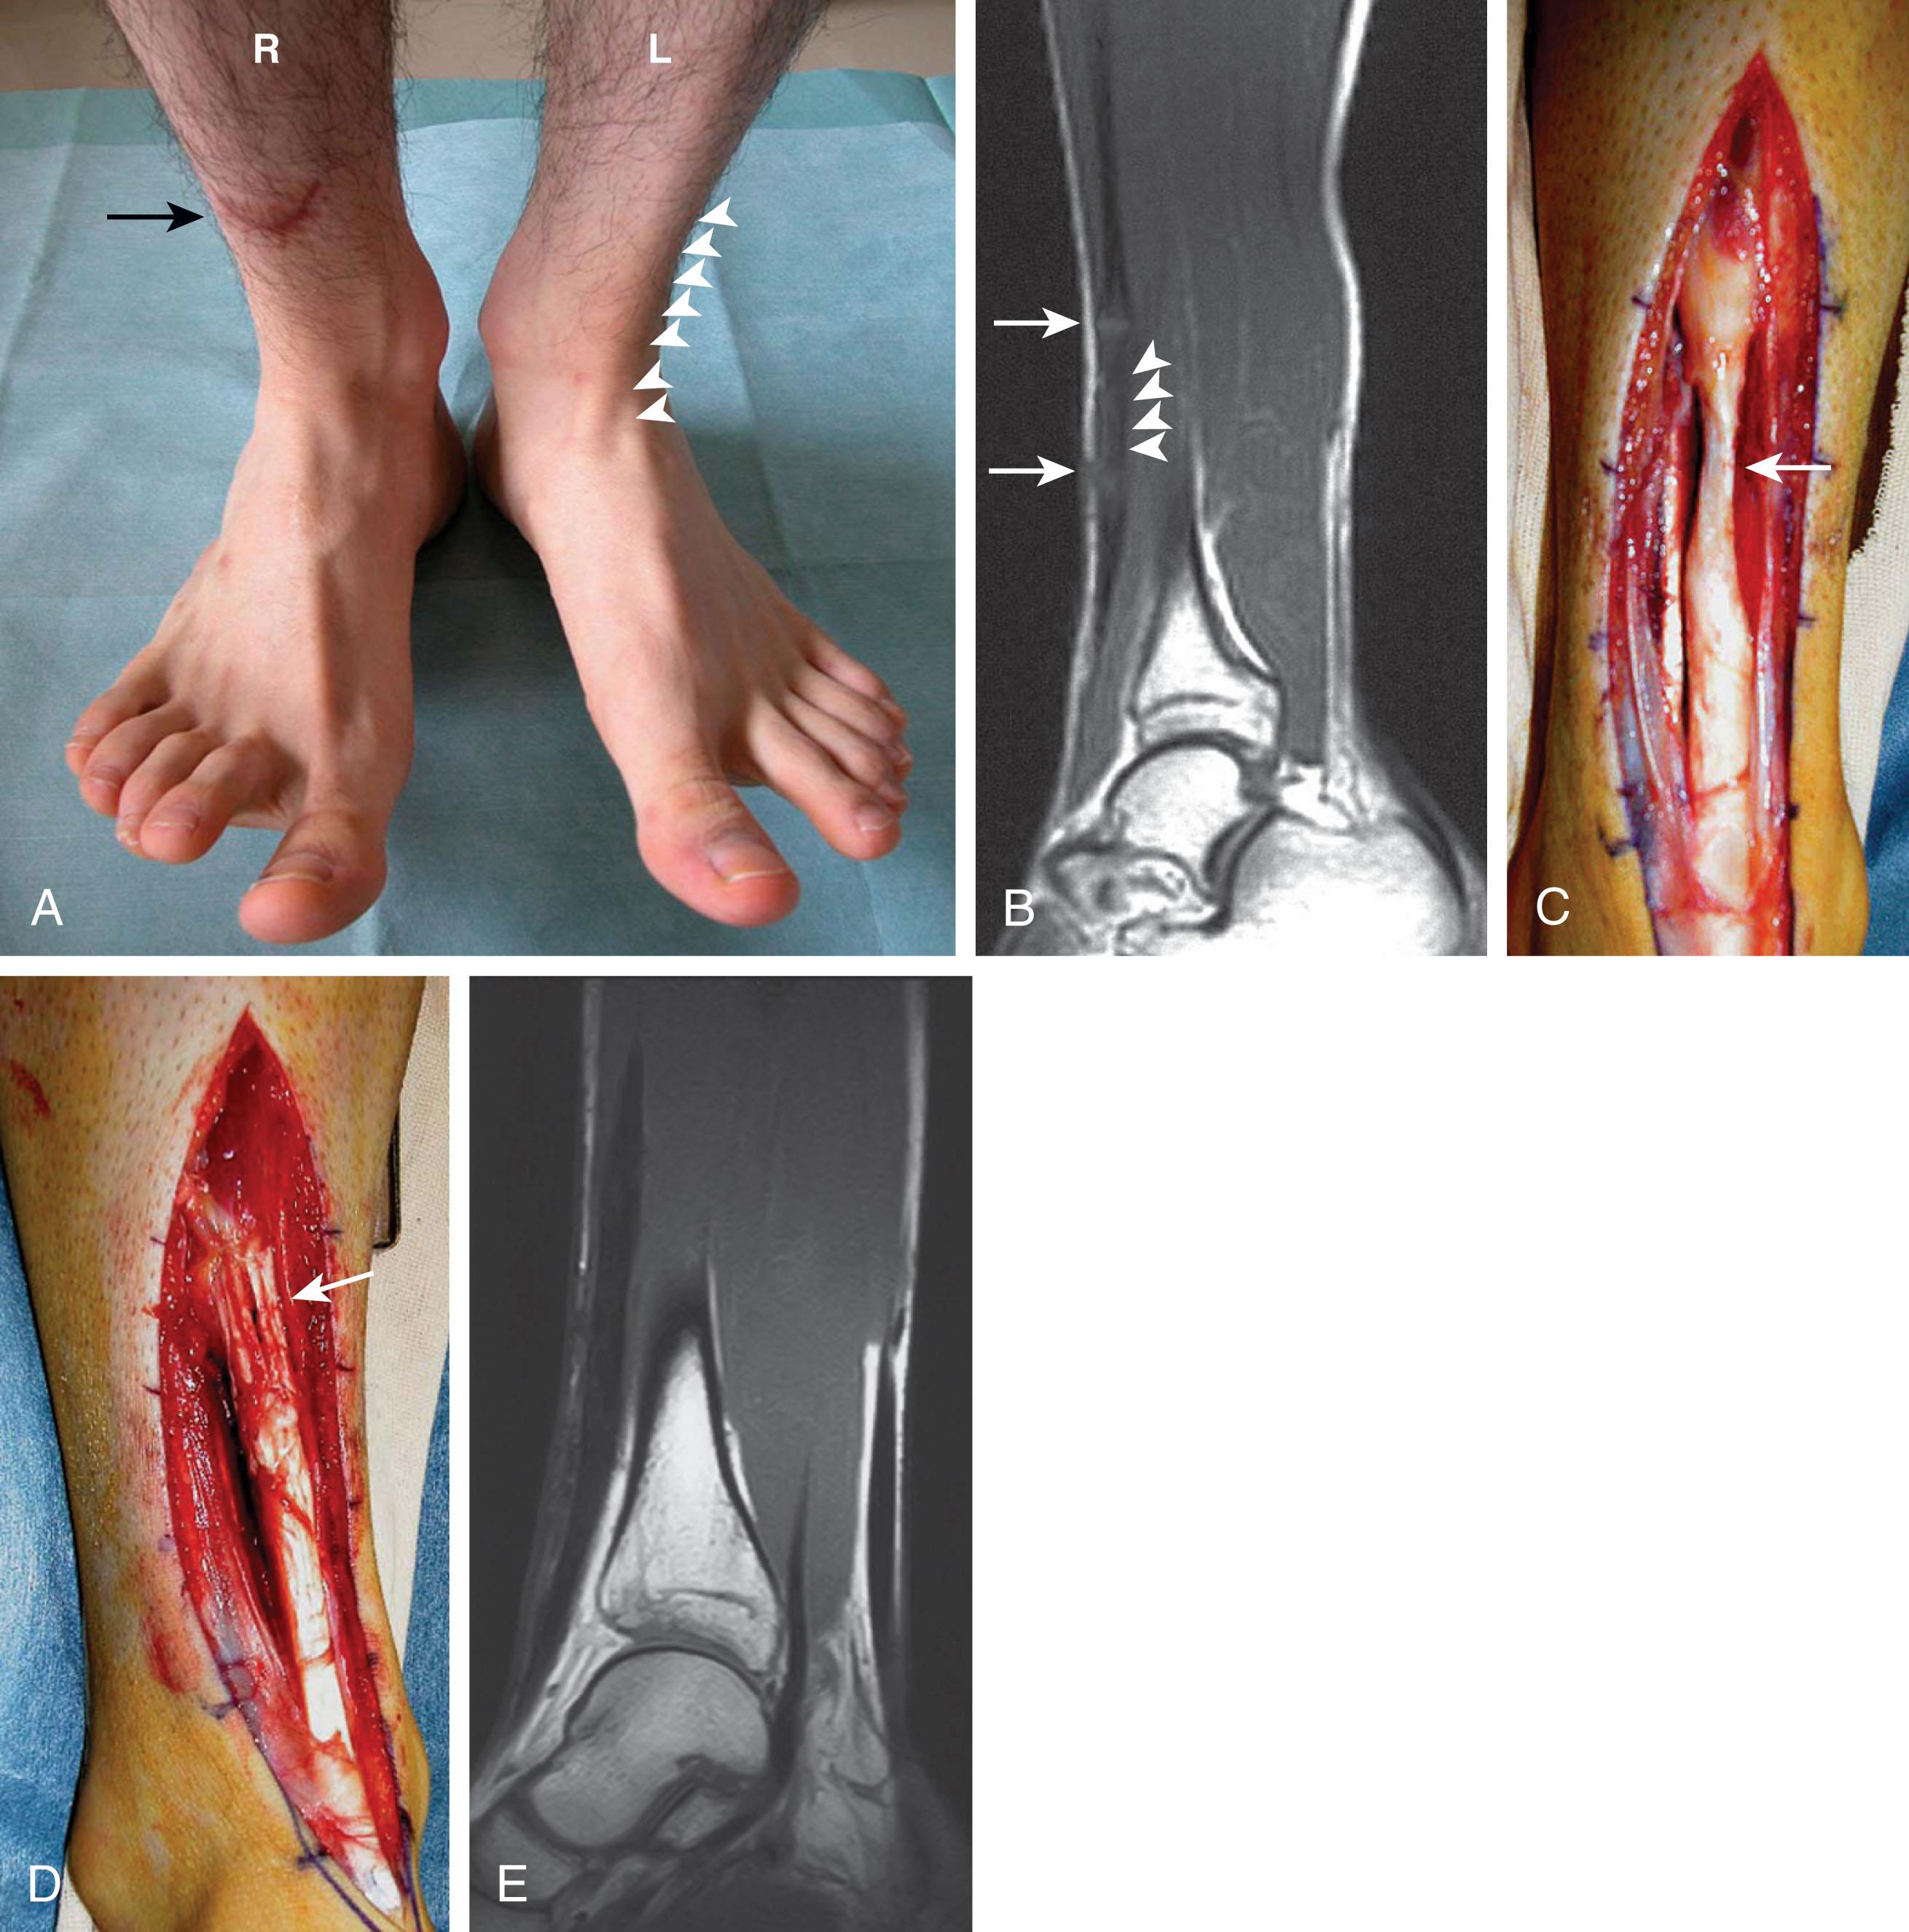 Fig. 28-20, Reconstruction of anterior tibial tendon with quadruple gracilis tendon graft. A , Six weeks after injury, note scar on right shin, with loss of anterior tibial tendon contour. The white arrowheads denote the normal contour of the tendon; the large black arrow denotes the transverse scar. B , Preoperative T1- weighed sagittal magnetic resonance image (MRI) of the right leg shows a gap between stumps of the tendon ( white arrows and arrowheads ). C , Thin cord of fibrous scar tissue ( white arrow ) connects the two tendon stumps of the anterior tibial tendon. D , After quadrupled gracilis graft bridges the tendon gap. White arrow denotes area of tendon repair. E , Postoperative MRI at 1 year shows the reconstructed anterior tibial tendon.